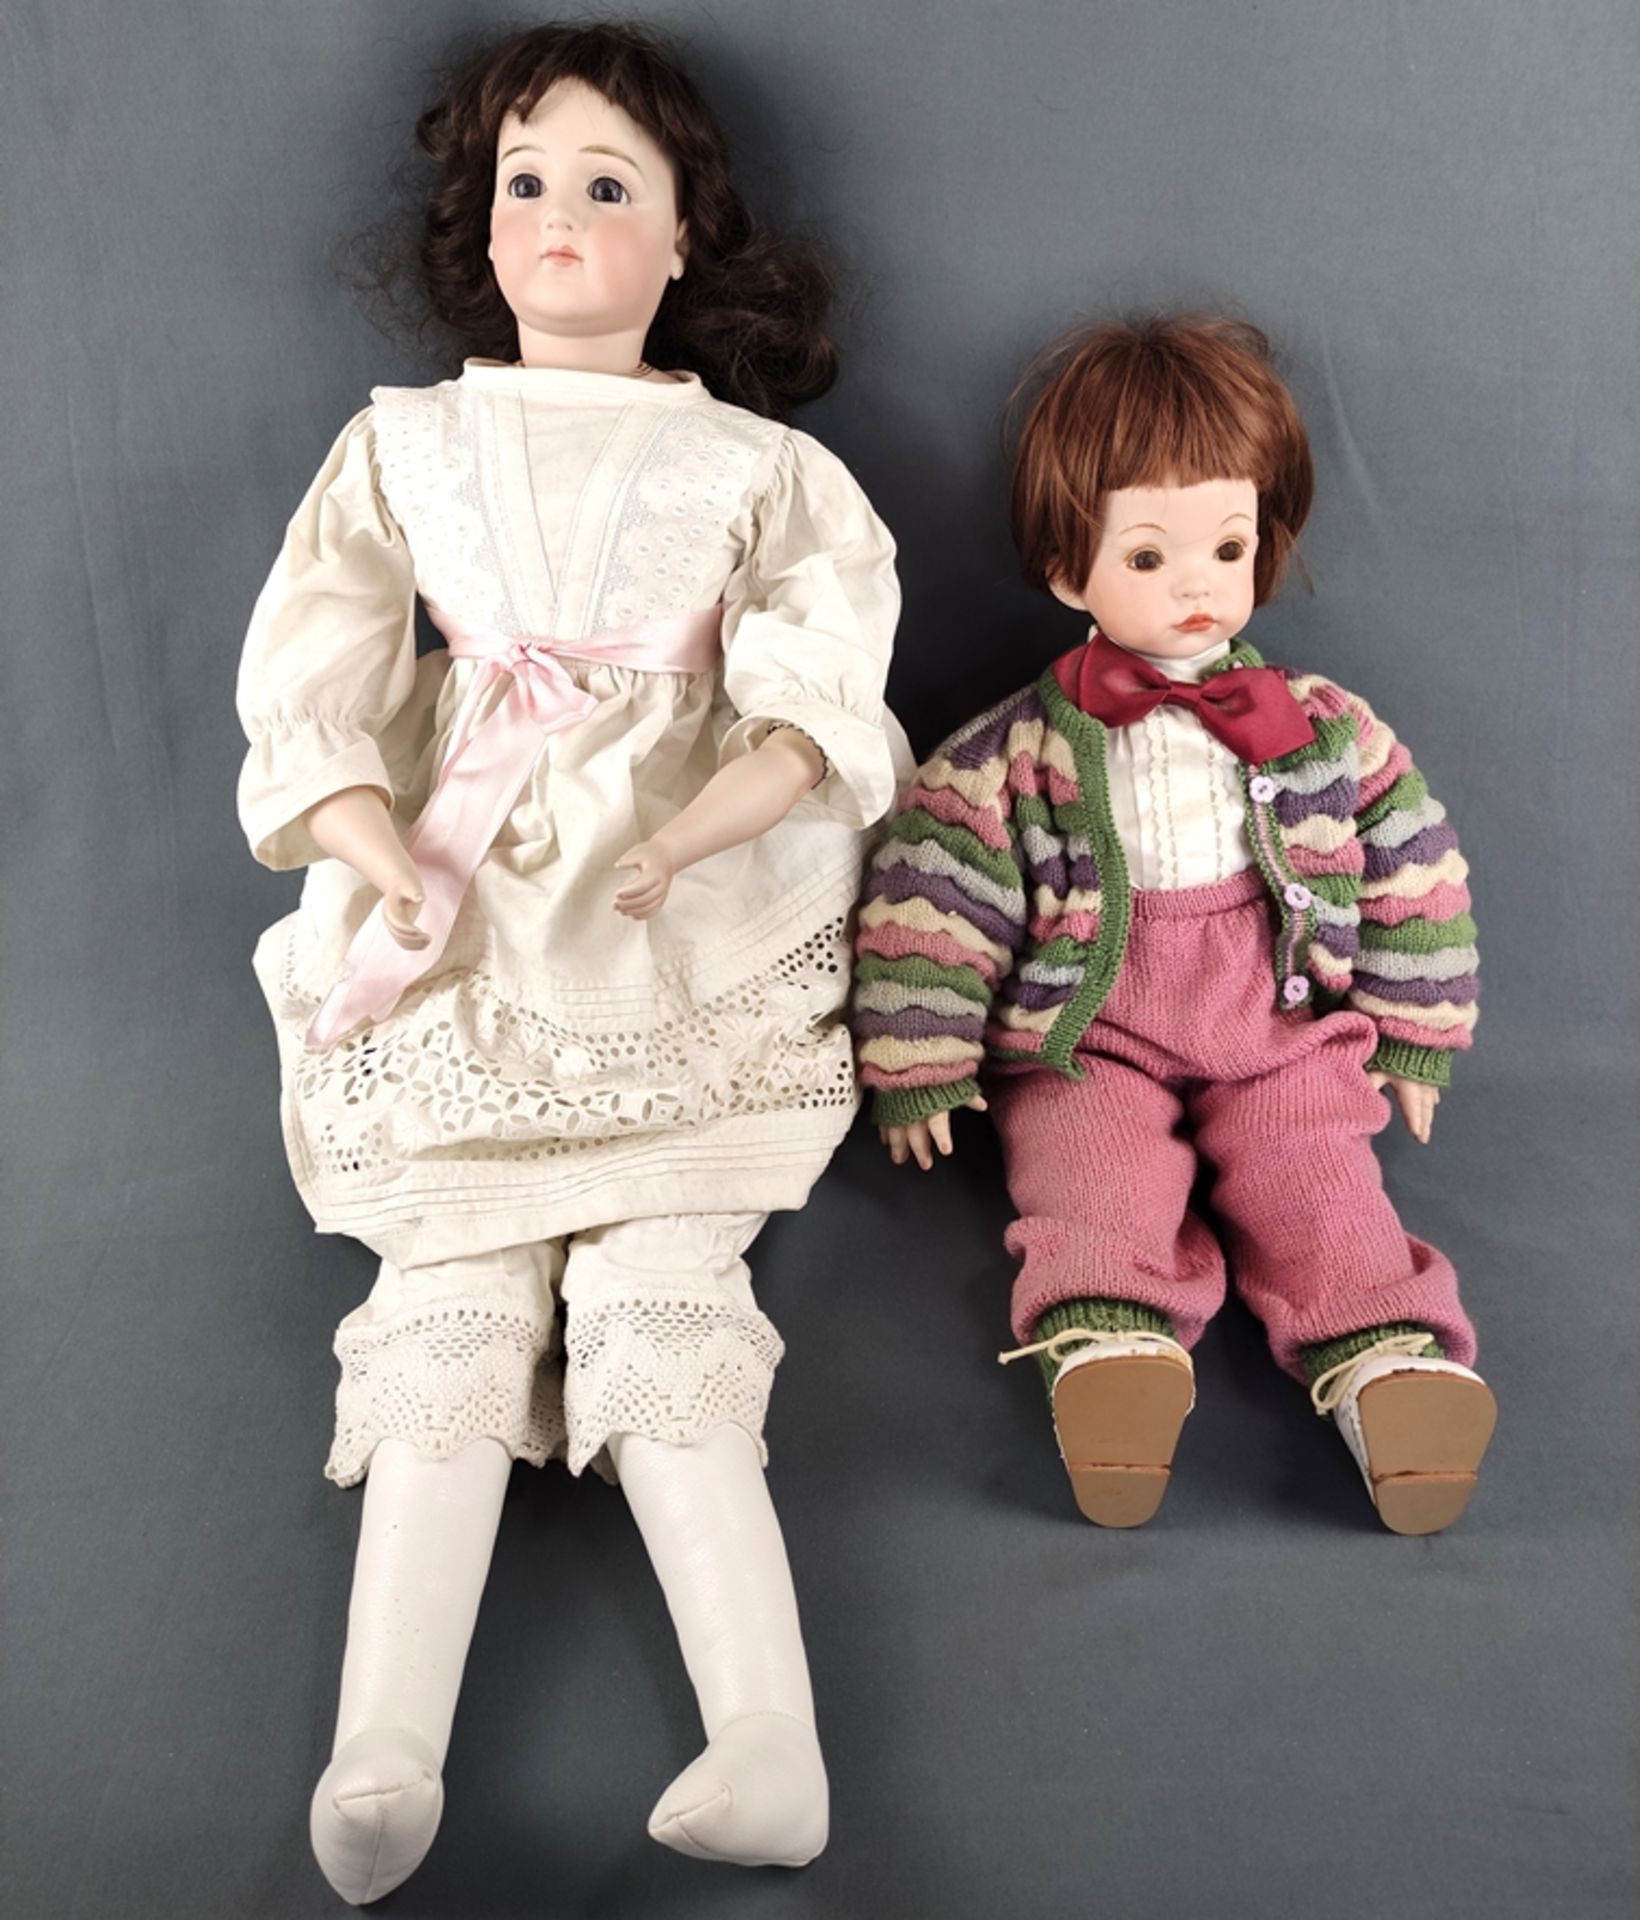 Two dolls, one with blue glass eyes, closed mouth and brown curly wig, head and hands made of bisqu